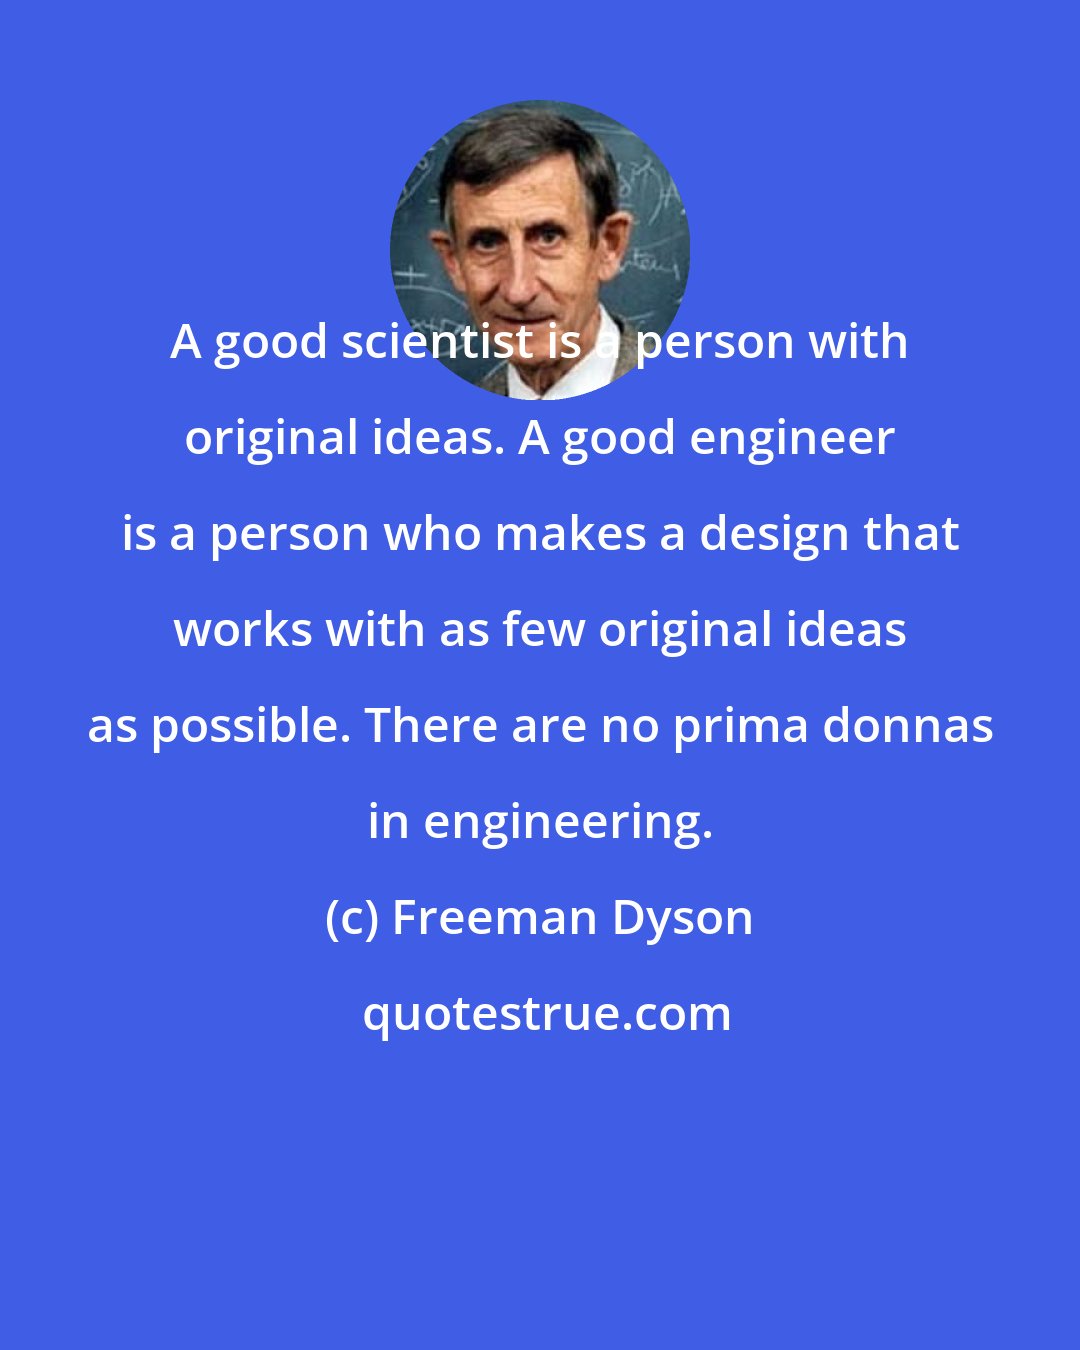 Freeman Dyson: A good scientist is a person with original ideas. A good engineer is a person who makes a design that works with as few original ideas as possible. There are no prima donnas in engineering.